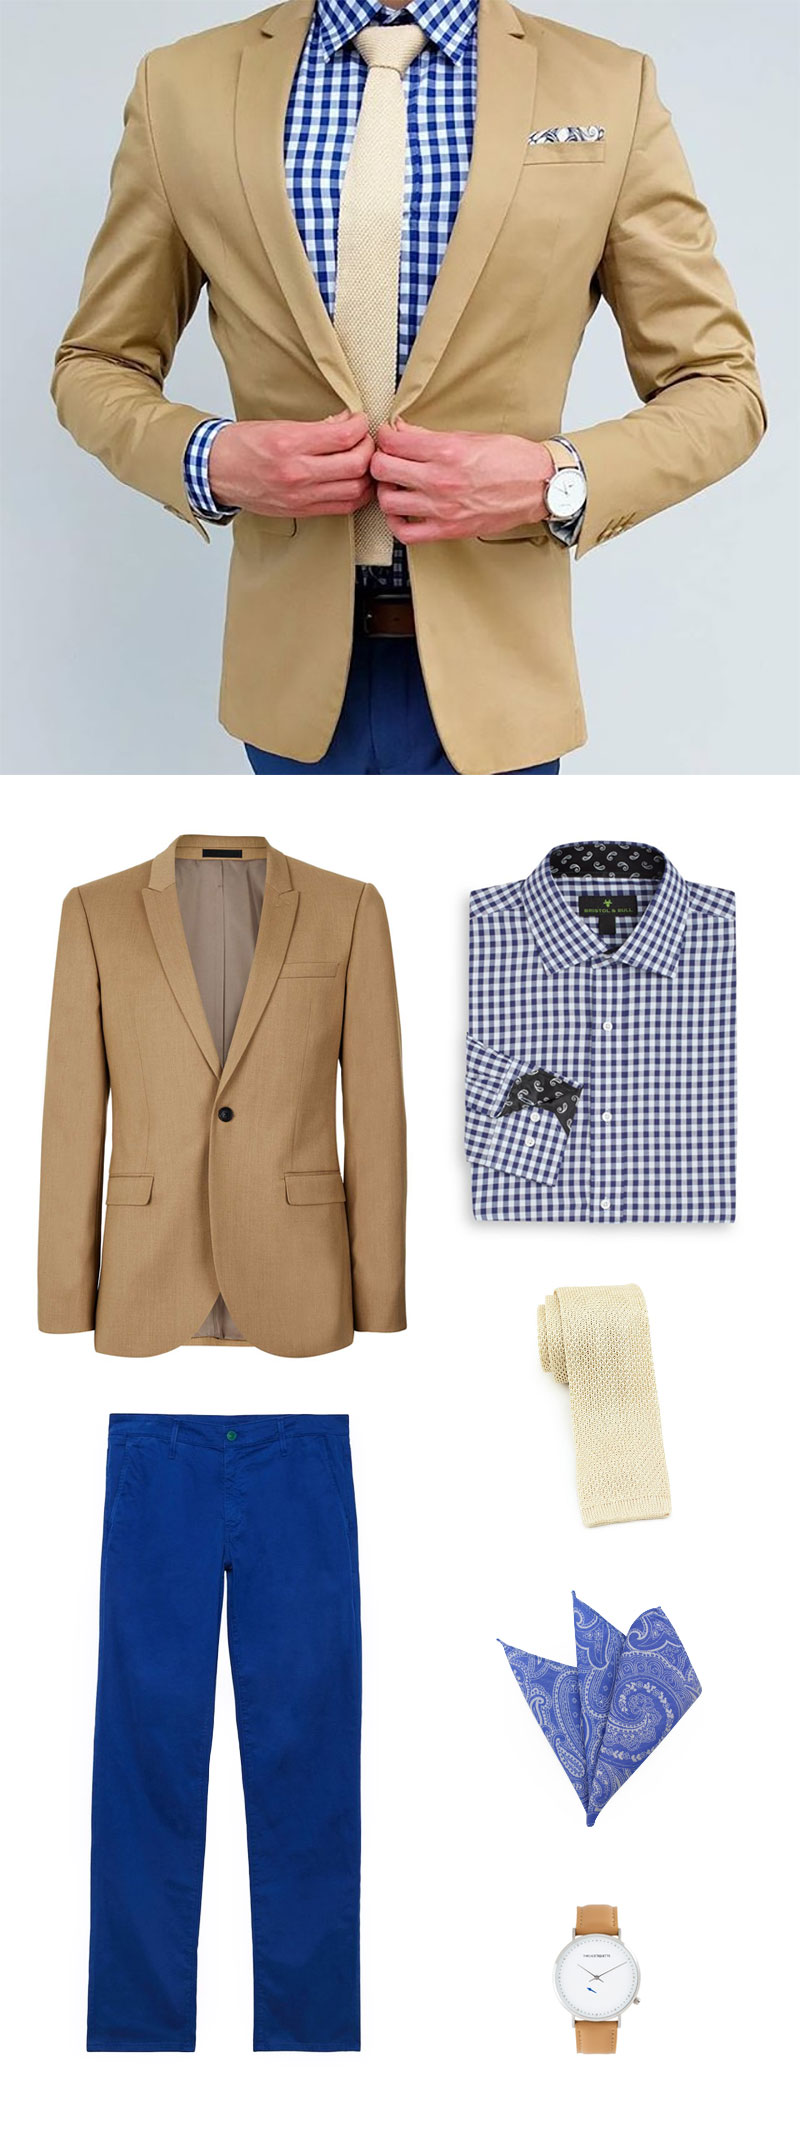 Shop This Look: Golden Cream Knit Tie + Gingham Check Shirt